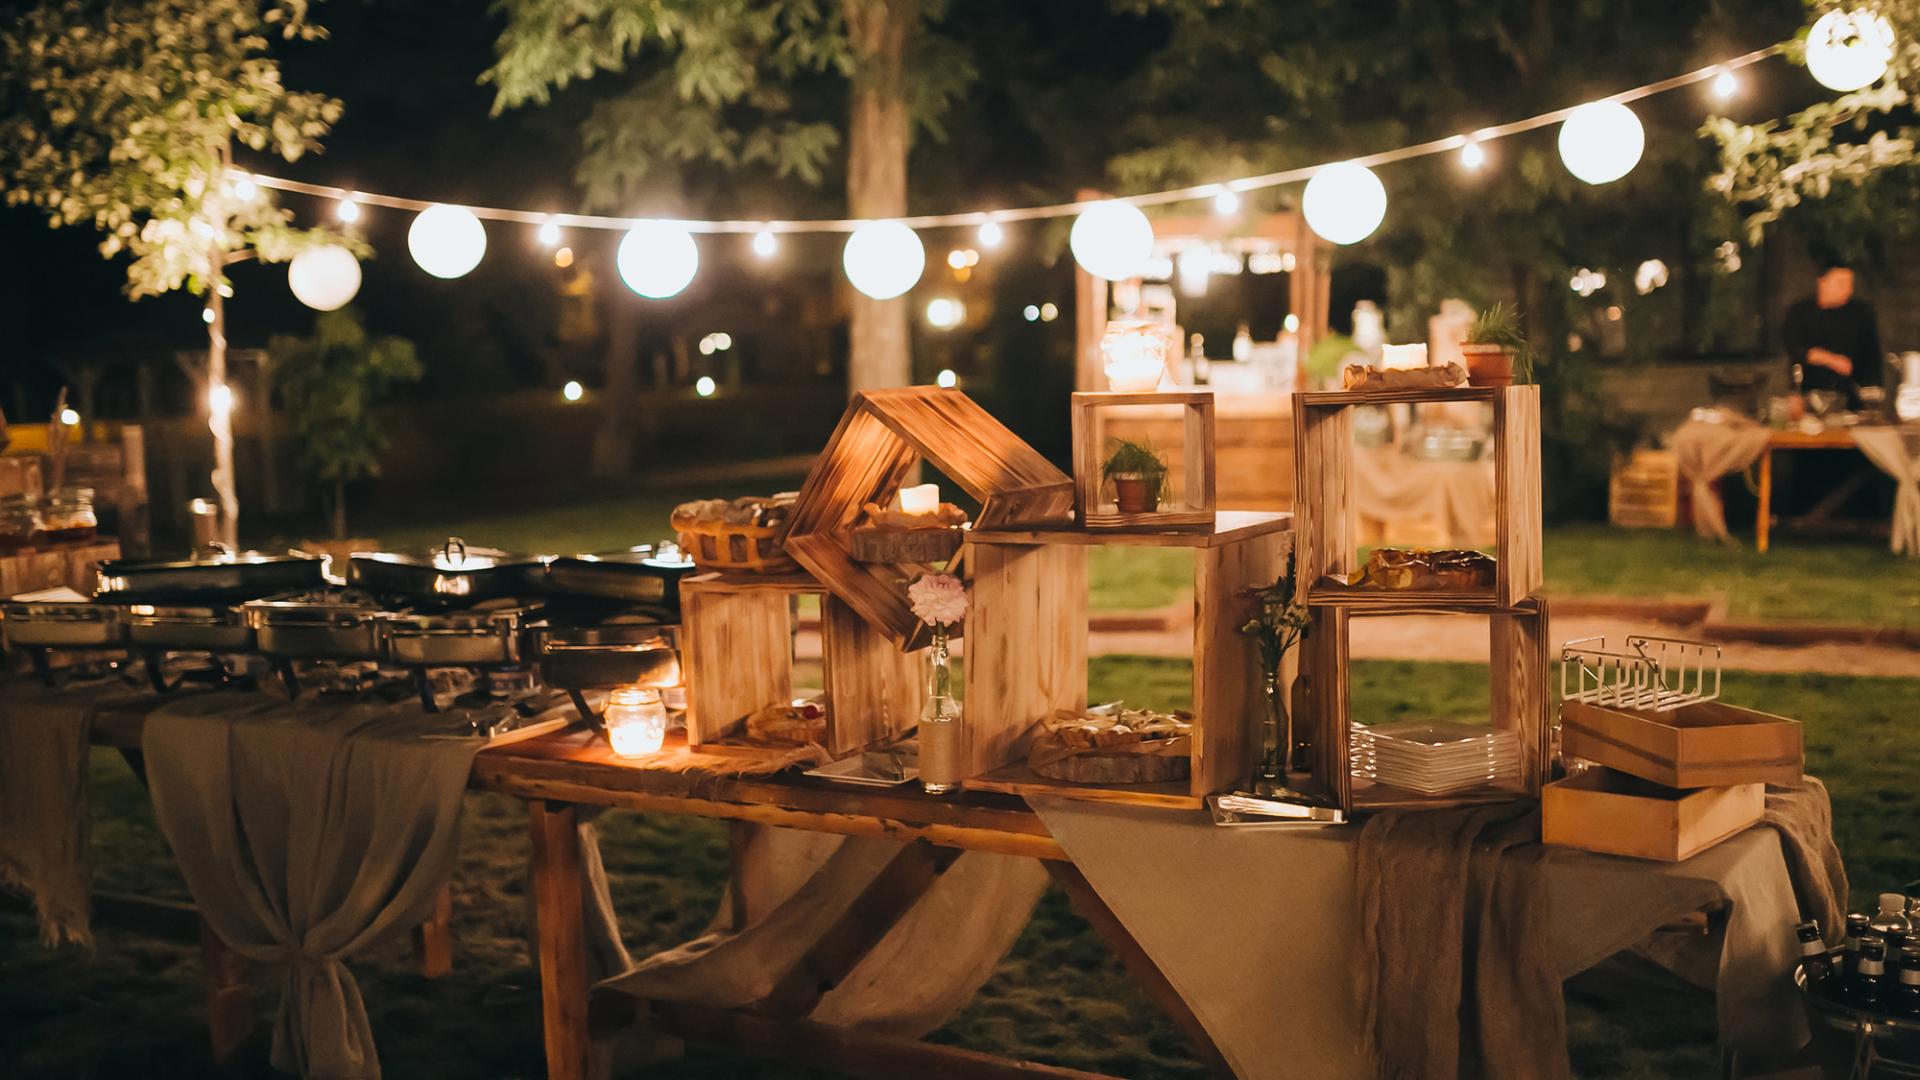 Rustic Wedding Venues for Rent in Chicago, IL